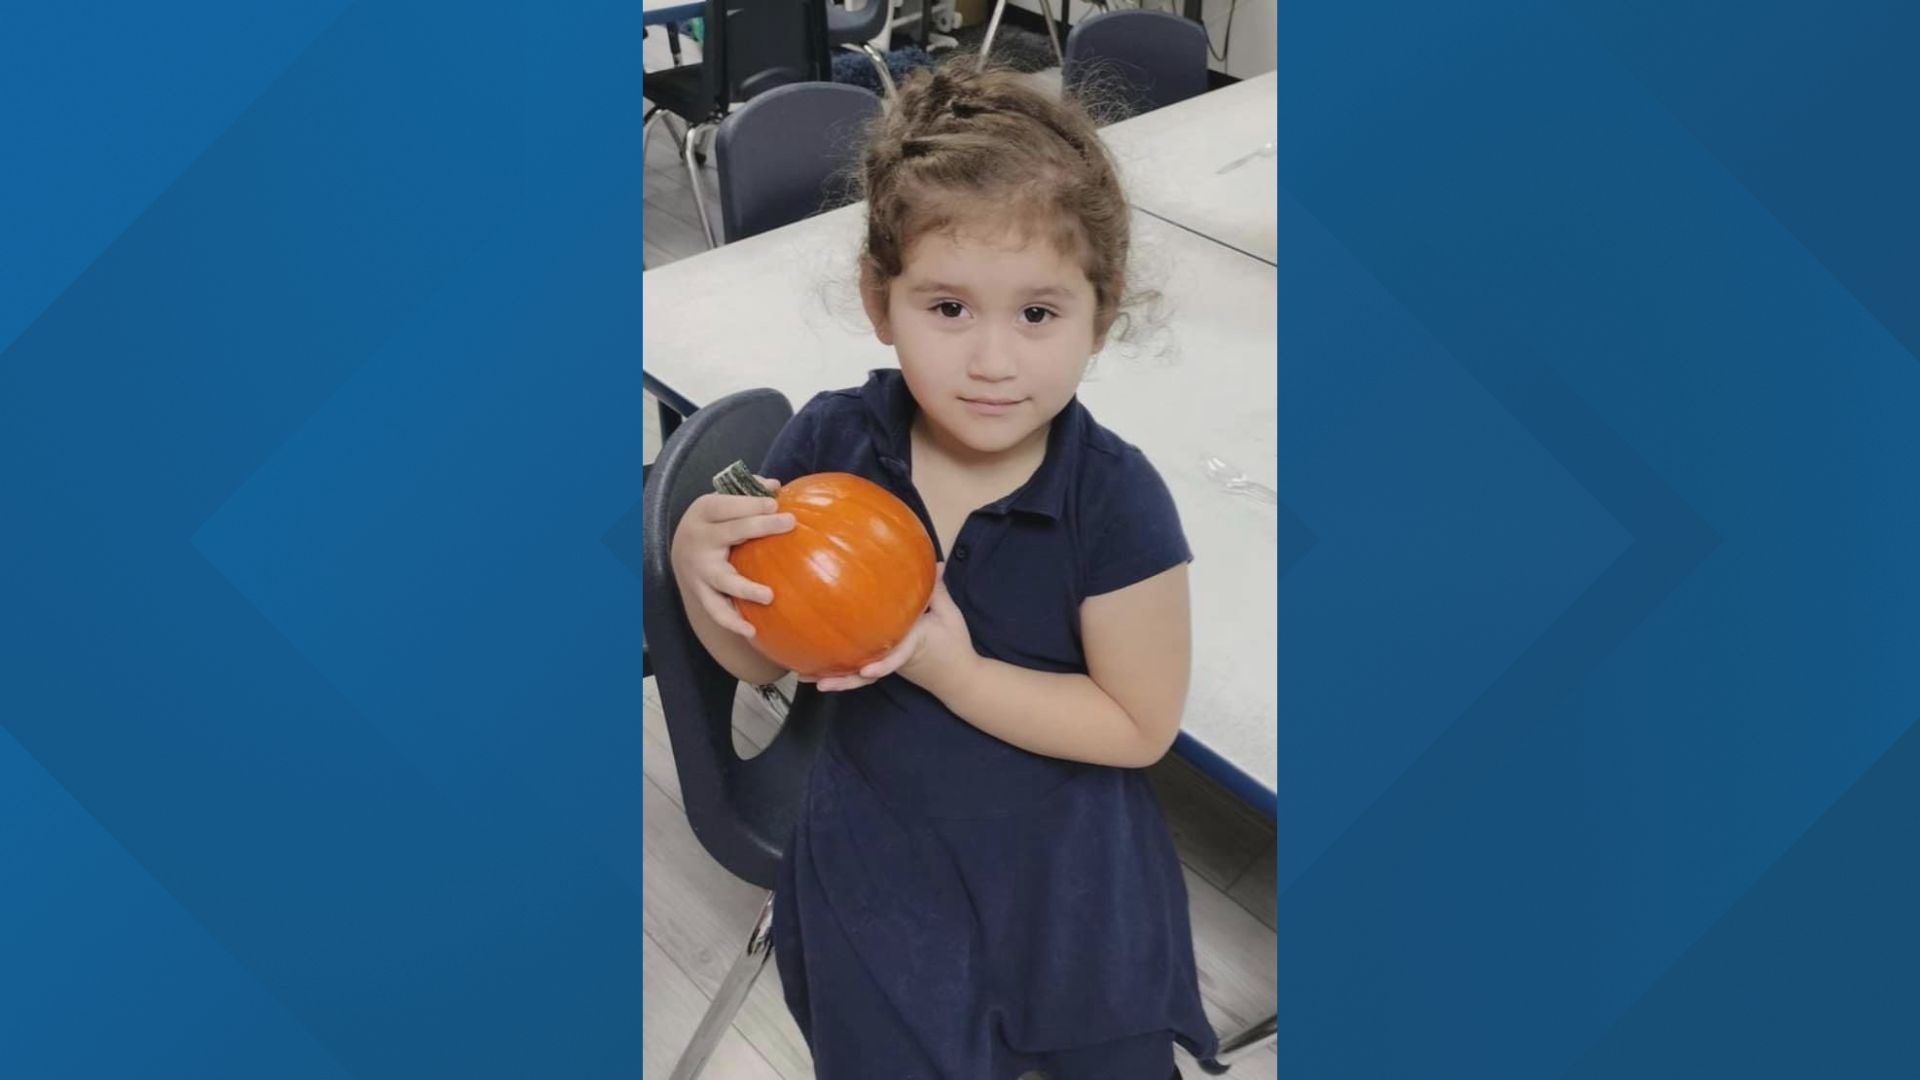 4-year-old Catherine Rodriguez and an adult were struck by a vehicle in northeast Columbus while trick-or-treating on Halloween. Catherine died from her injuries.